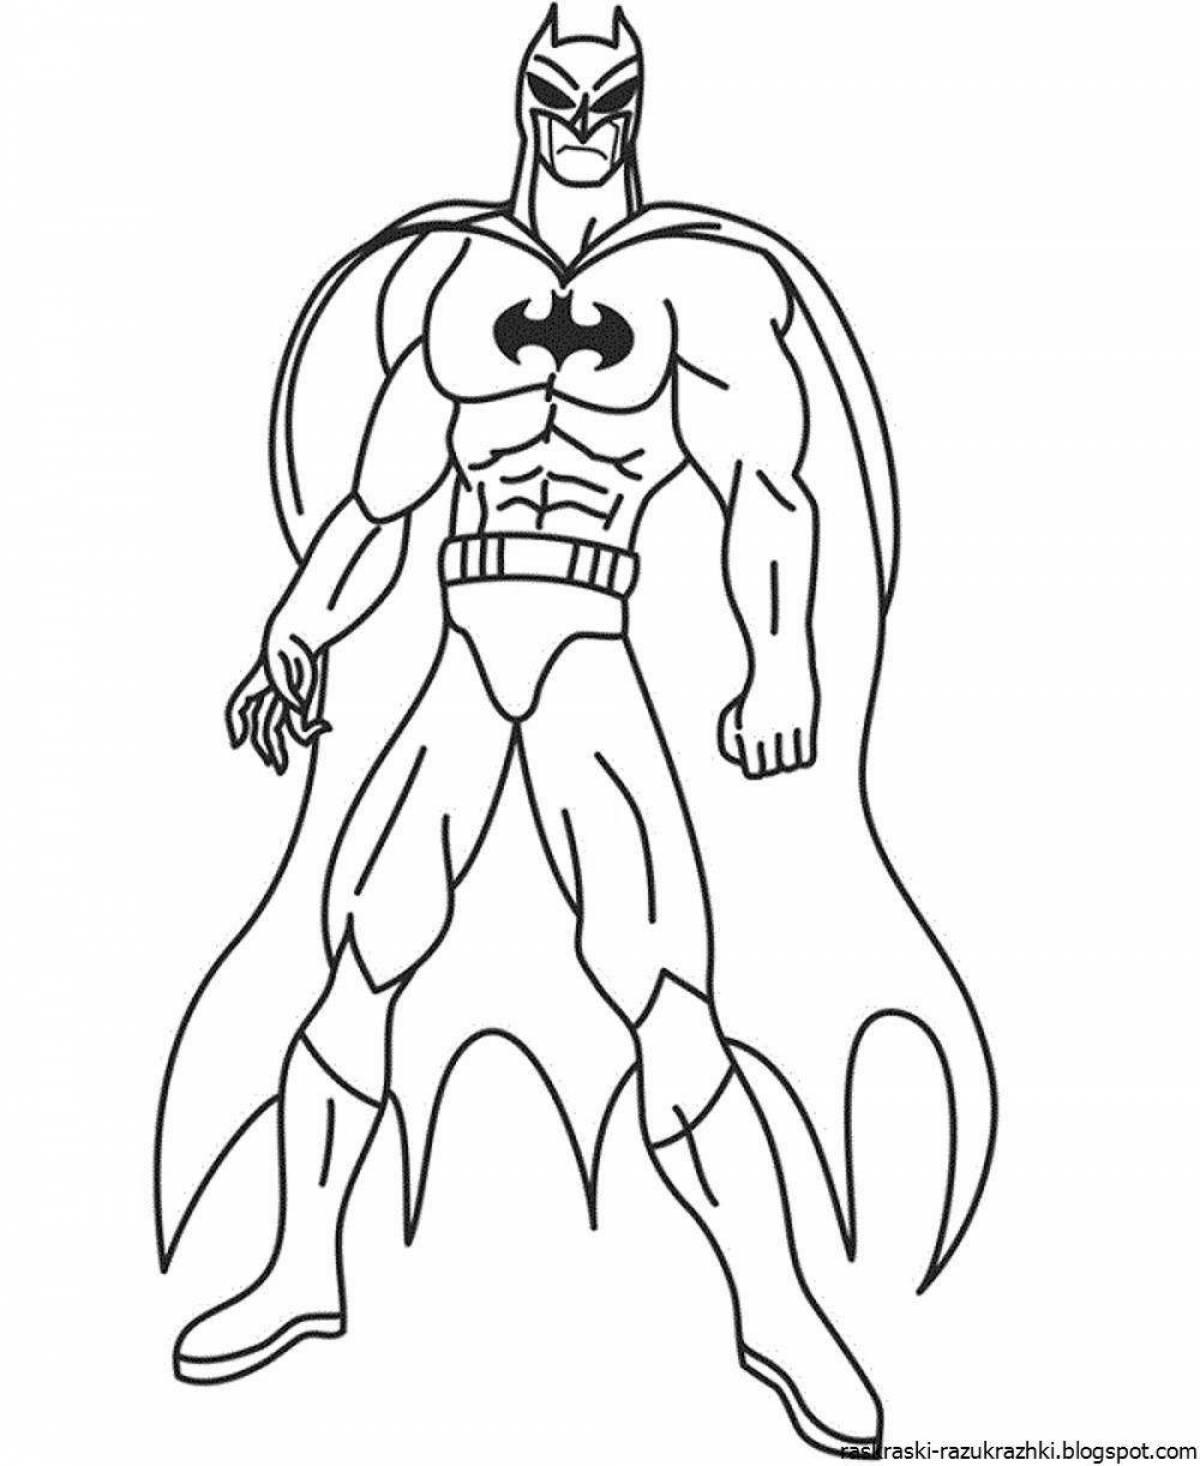 Humorous superhero coloring book for 4-5 year olds